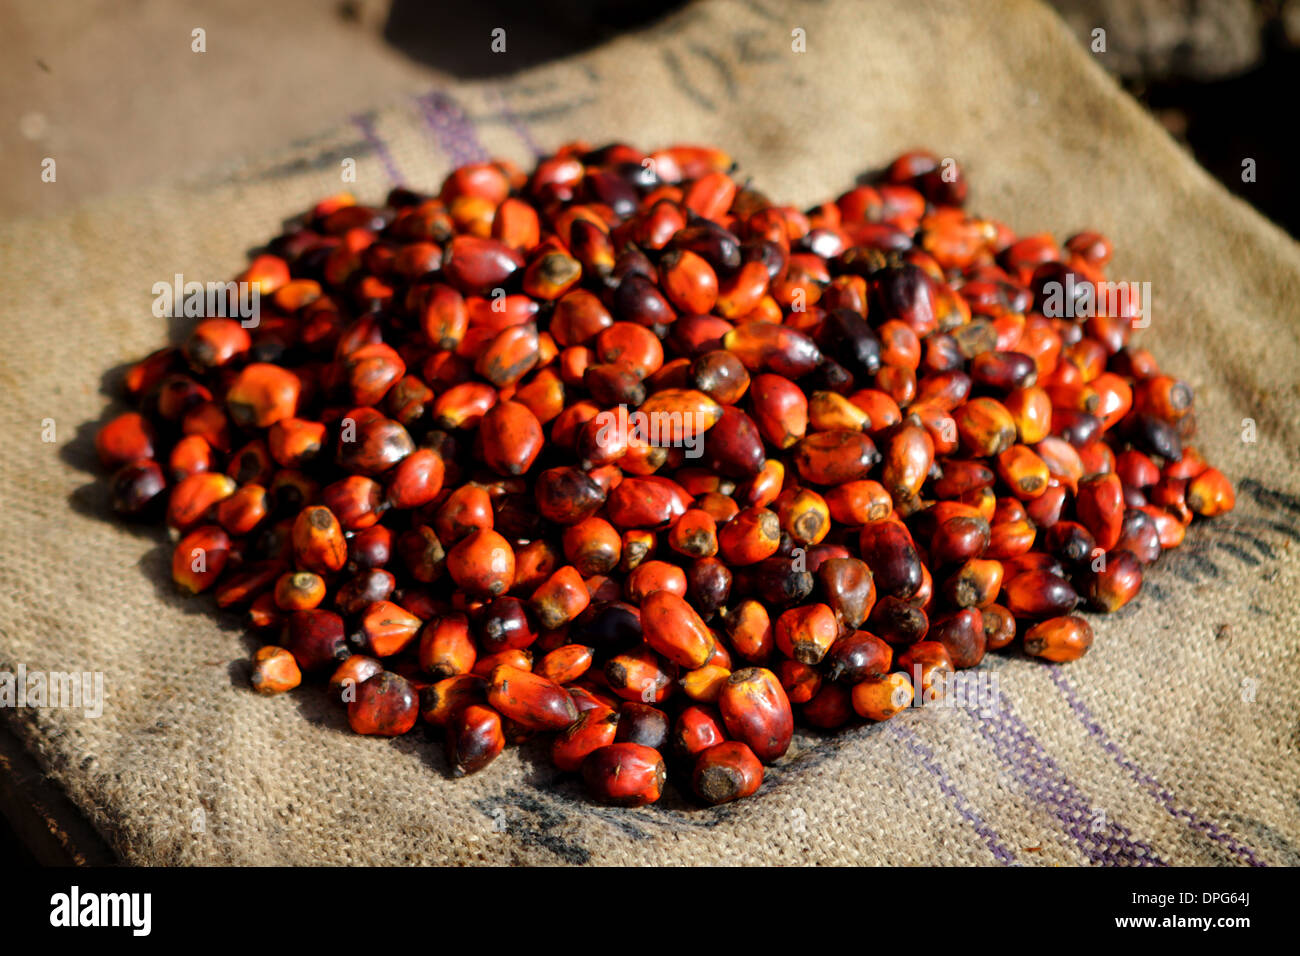 Piles of red chillis for sale in a street market in Ghana, West Africa Stock Photo